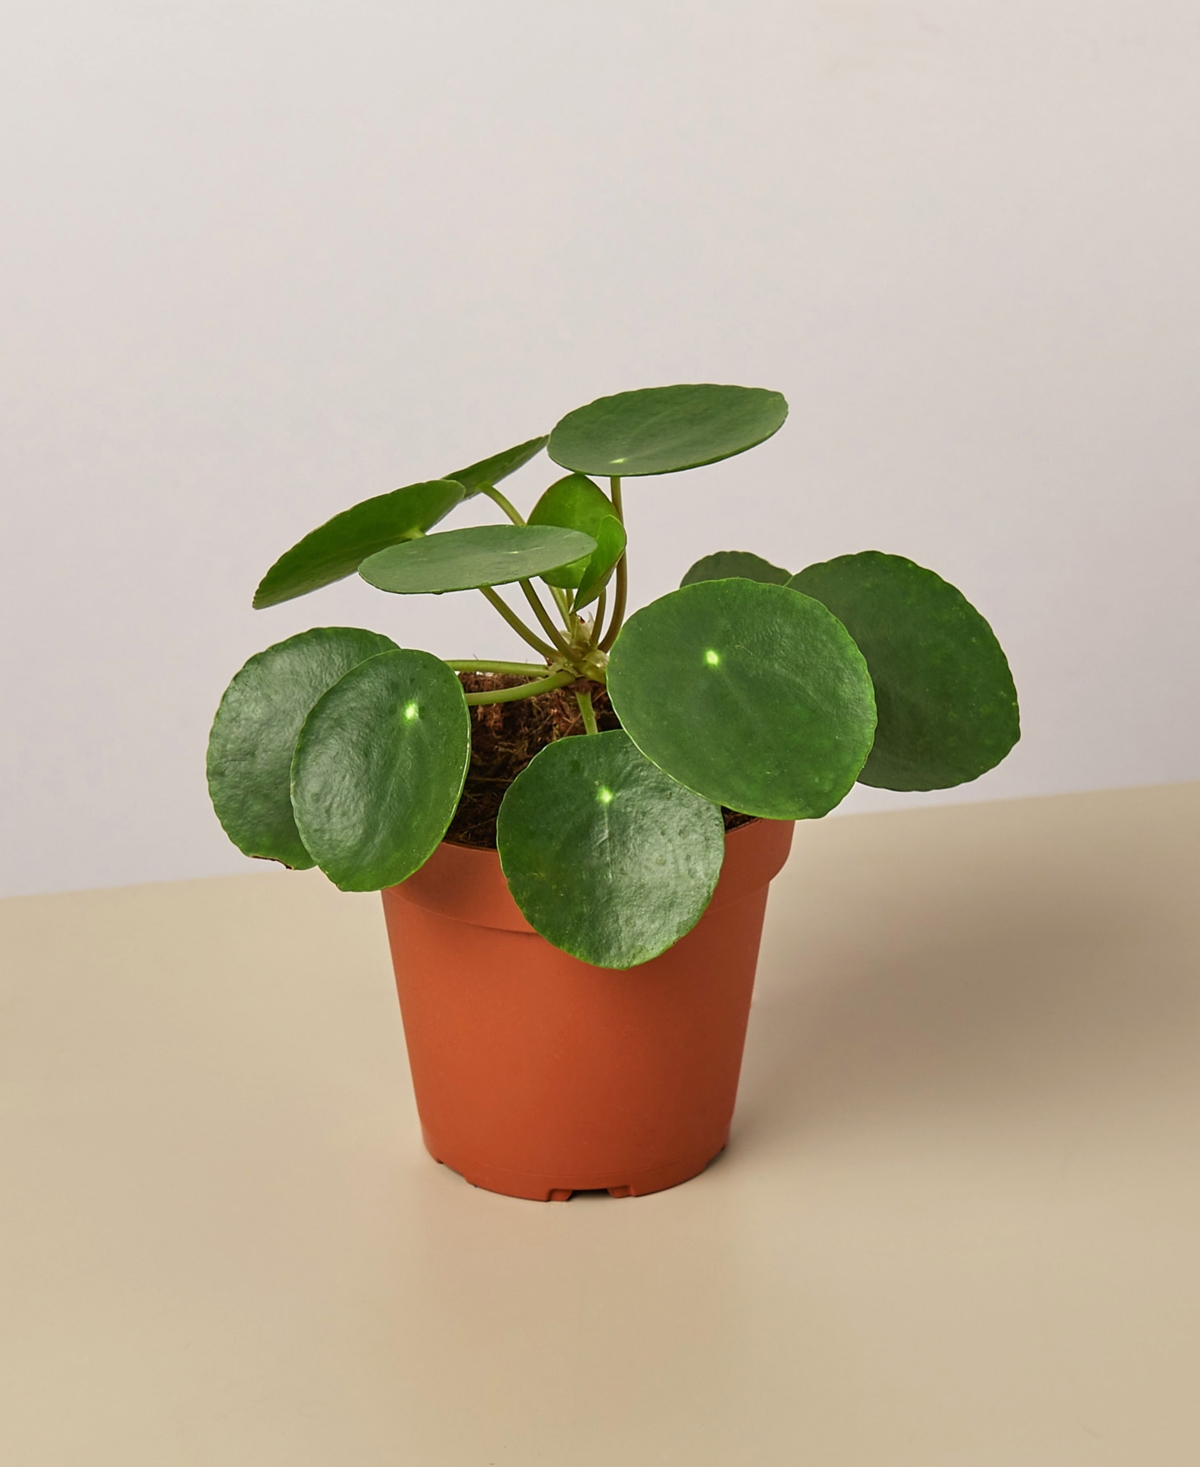 Pilea Peperomioides 'Chinese Money' Live Plant, 4" Pot